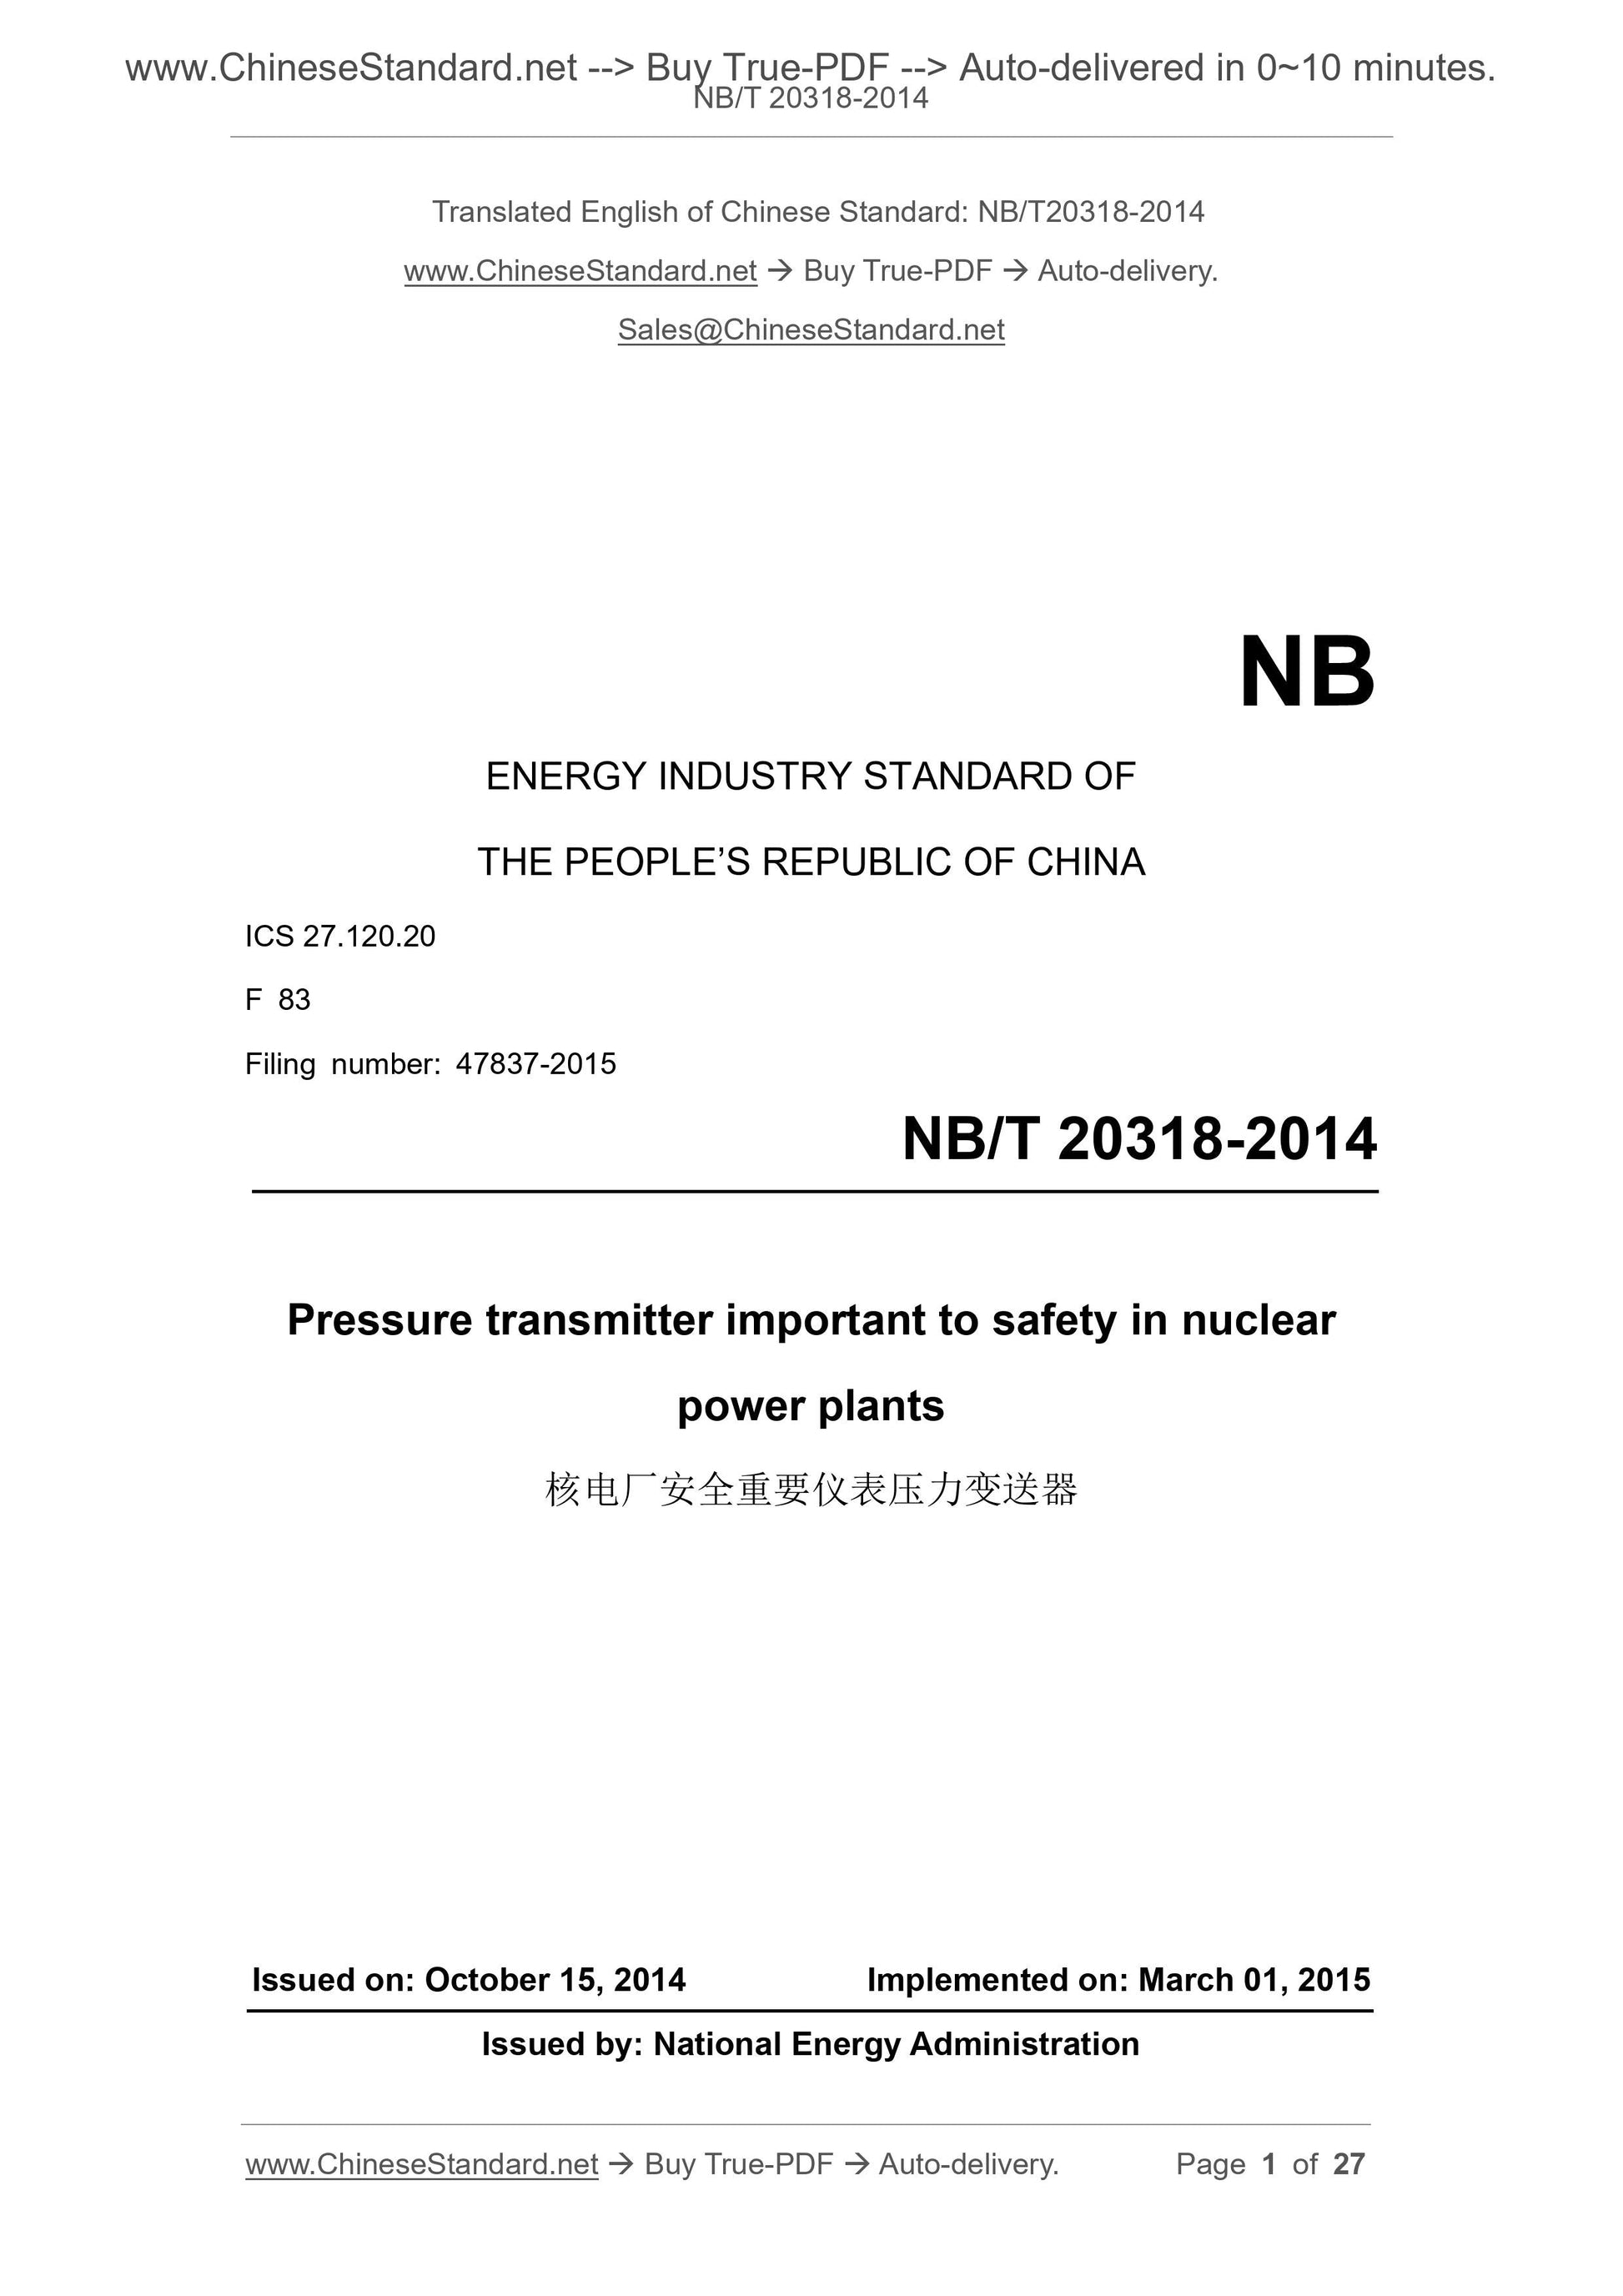 NB/T 20318-2014 Page 1